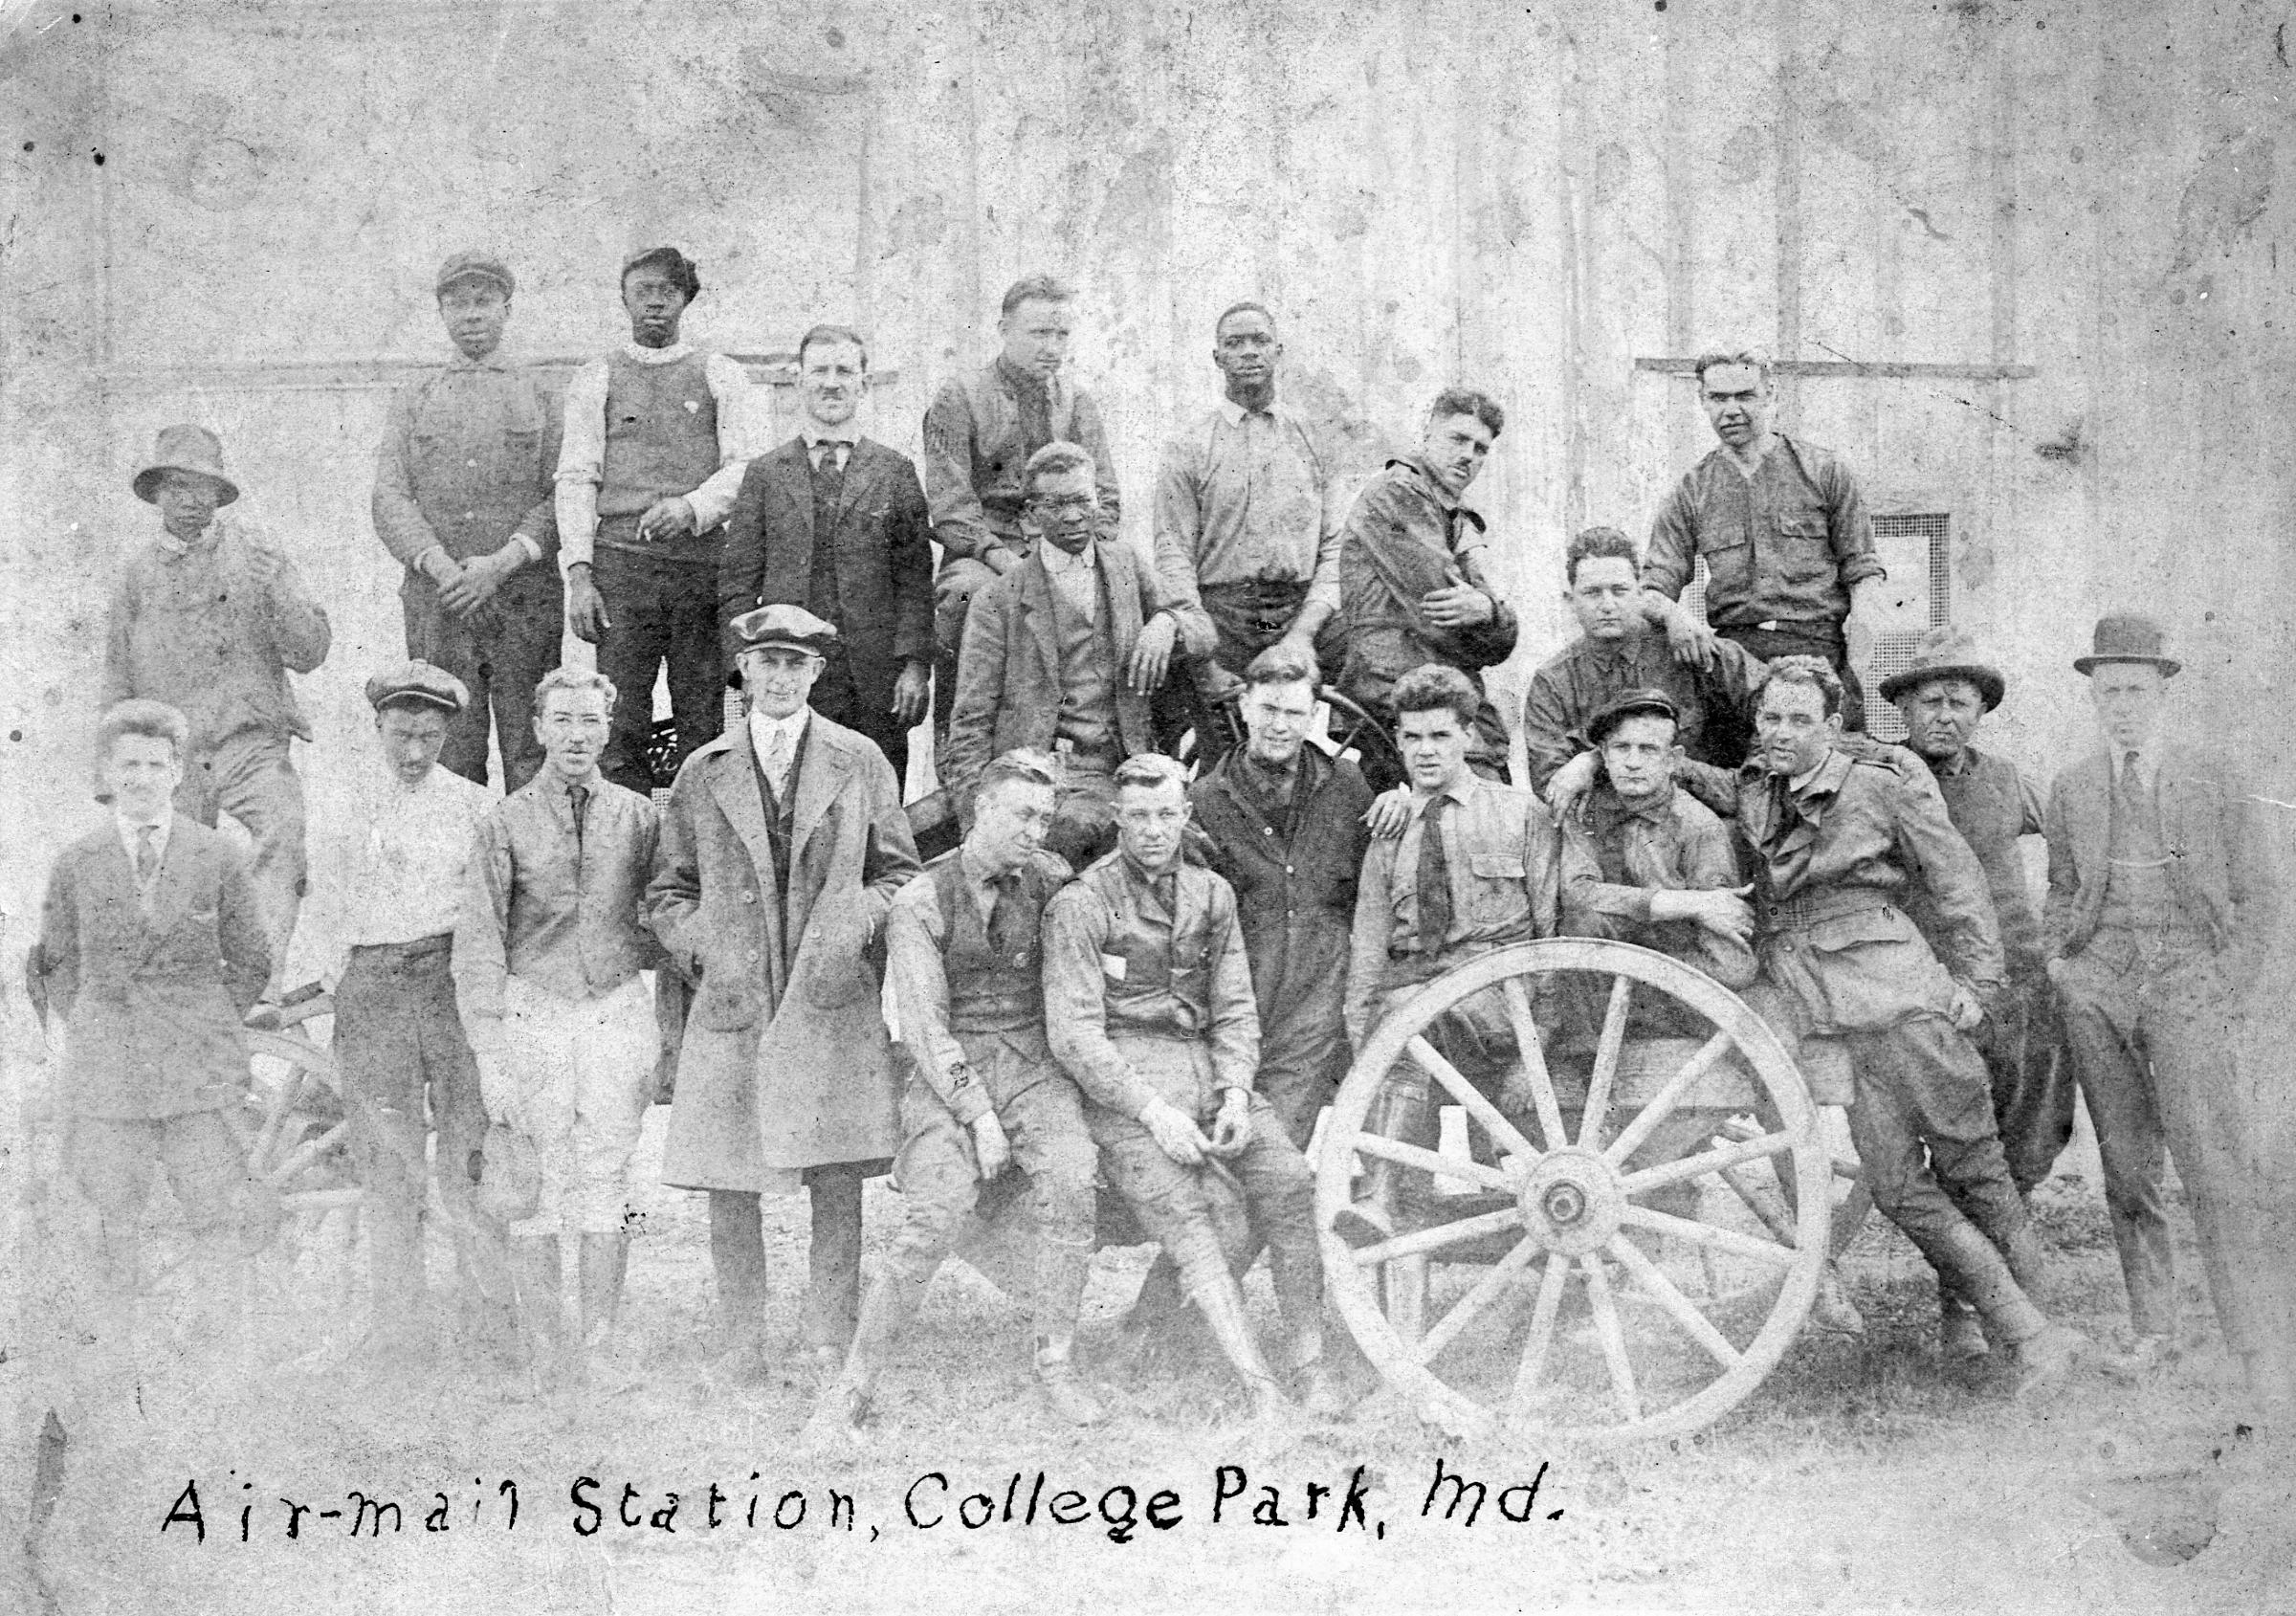 Workers at College Park Airfield